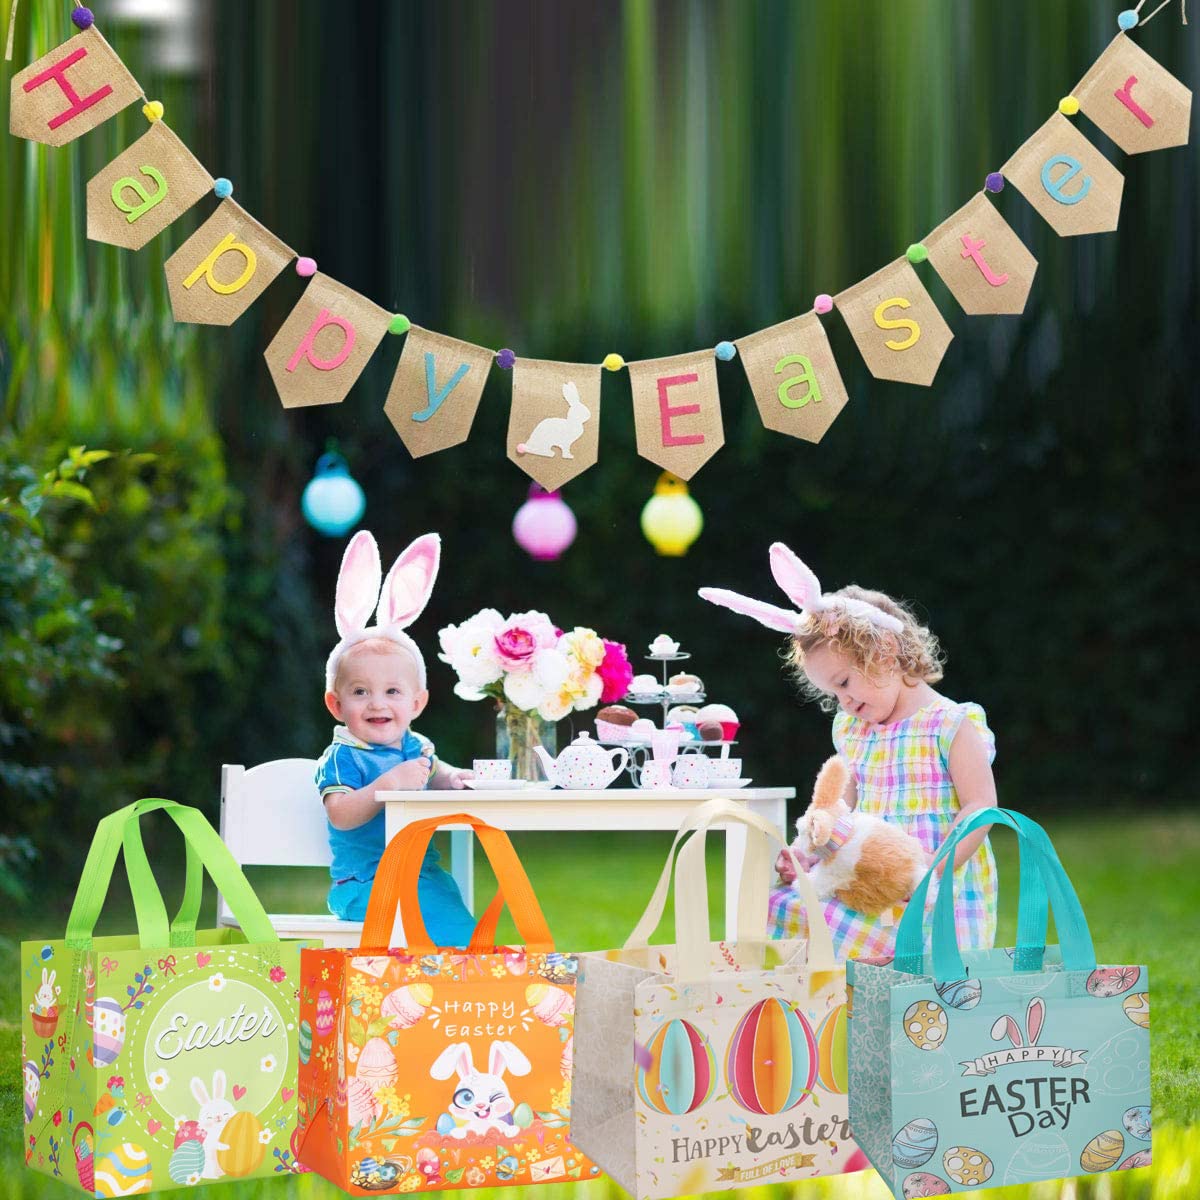 Jwssor 4 packs Reusable Gift Bags,Treat Bags with Handle,Non-woven Bags for Easter Party